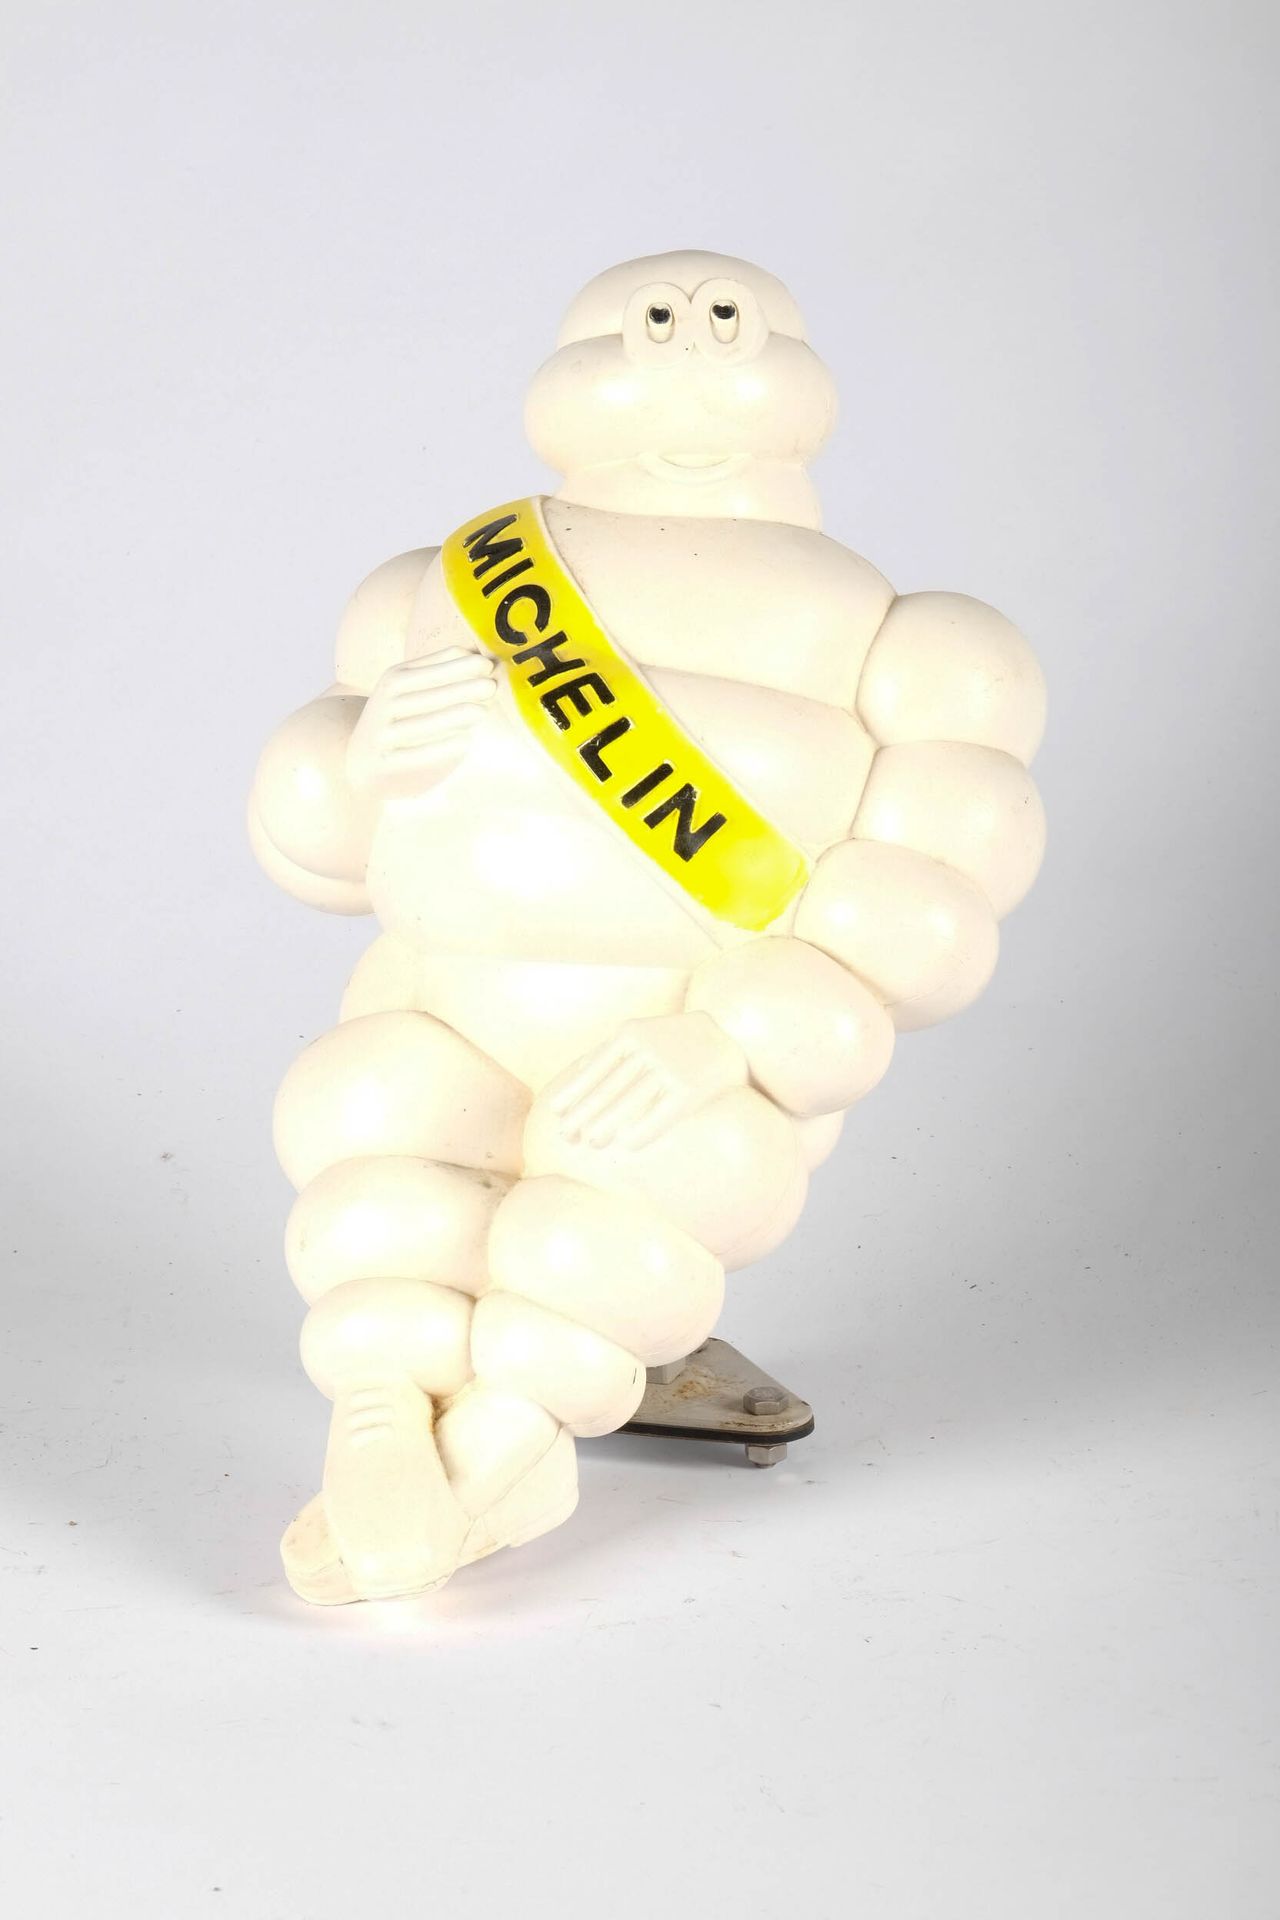 Collection "Bibendum", Michelin Man with hanging system, 43 cm high, marking on &hellip;